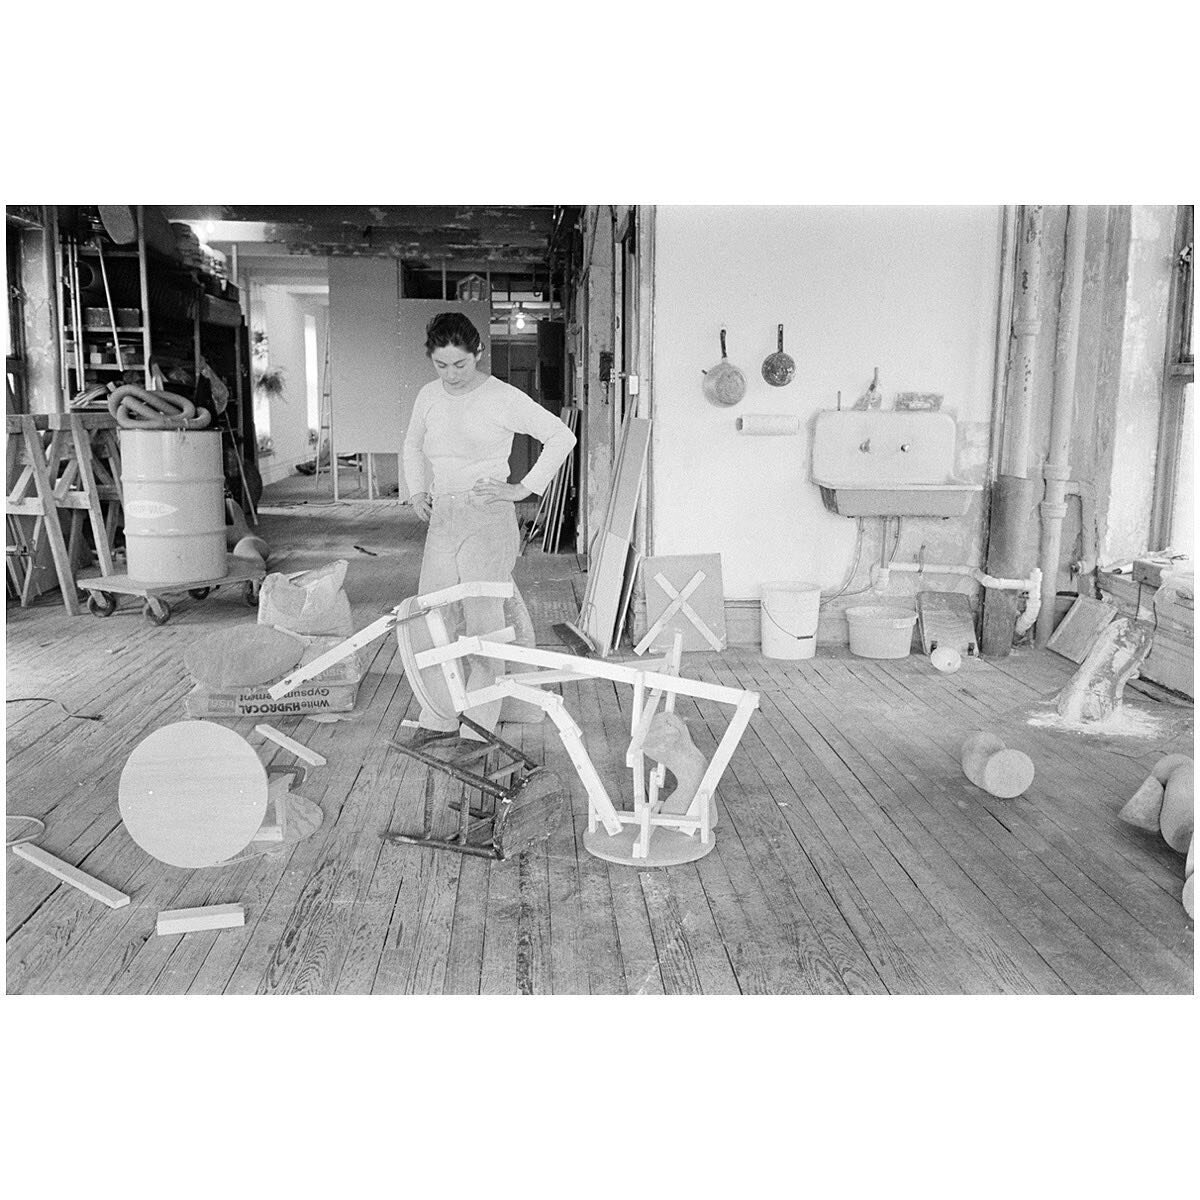 The @MaryAnnUngerEstate has announced an encore presentation of #EveBiddle | #MaryAnnUnger: Generation in a-specific format in the artists&rsquo; former loft from May 17. Recently on view at @DavidsonGallery and curated again by @YlinkaBarotto, the d